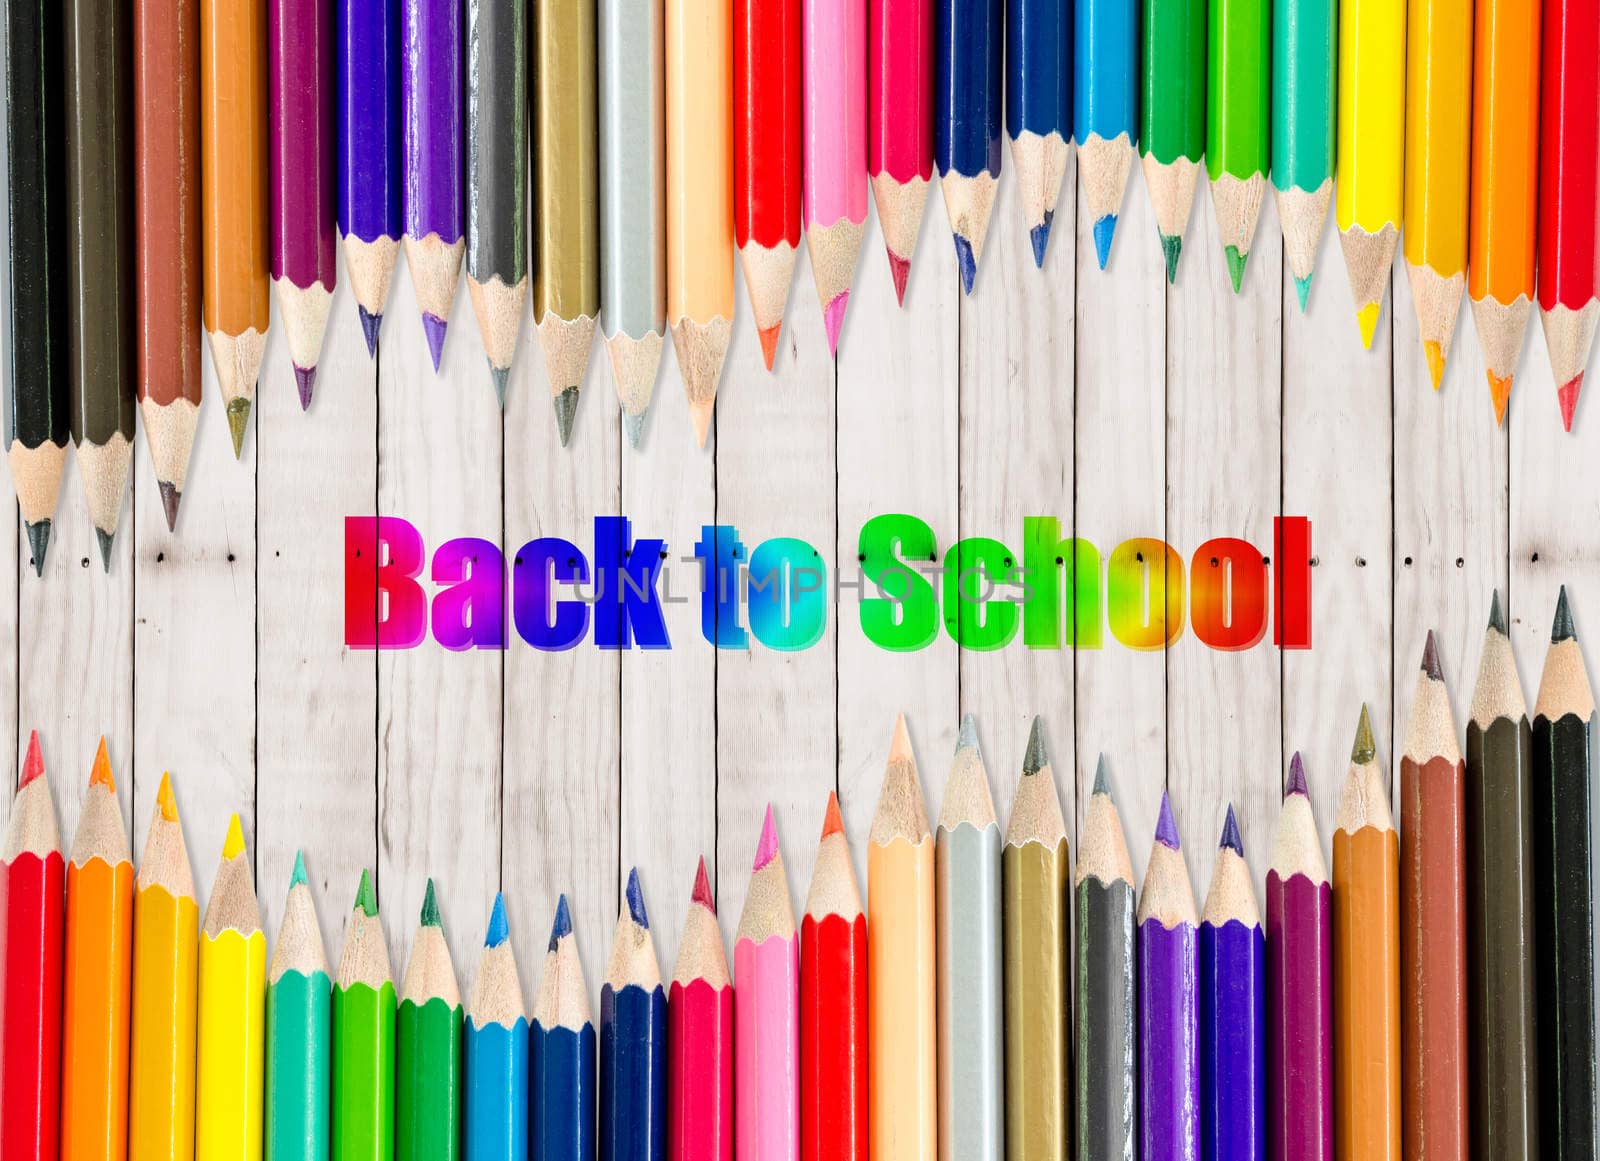 back to school - frame of multicolored pensils on wooden background